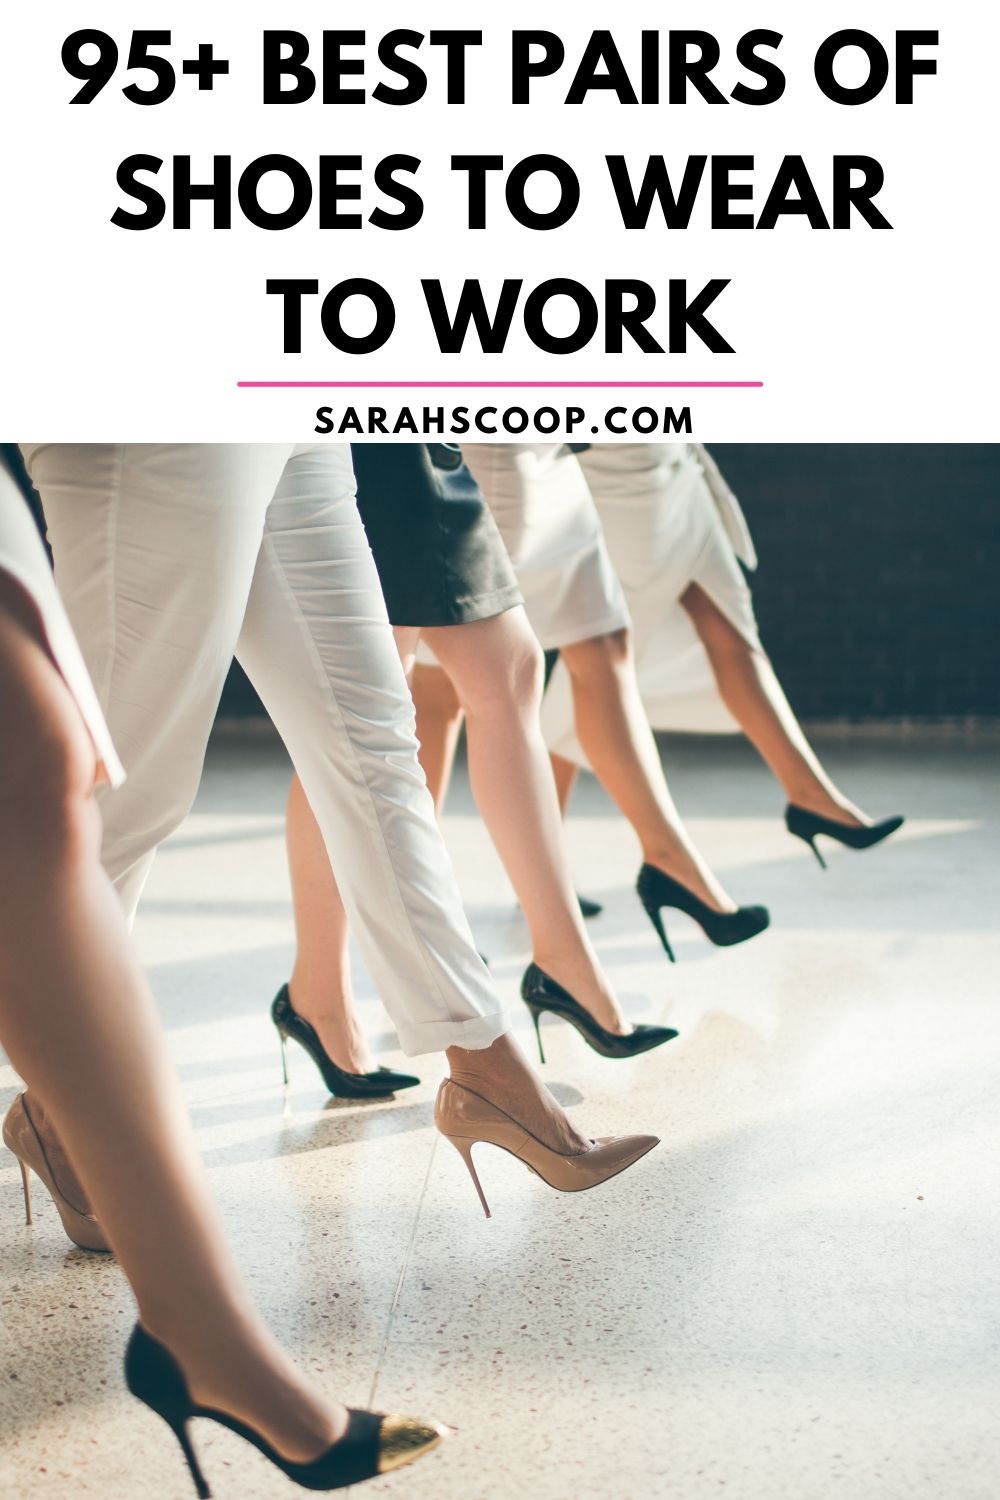 95+ Best Office Work Shoes for Women And Most Comfortable | Sarah Scoop